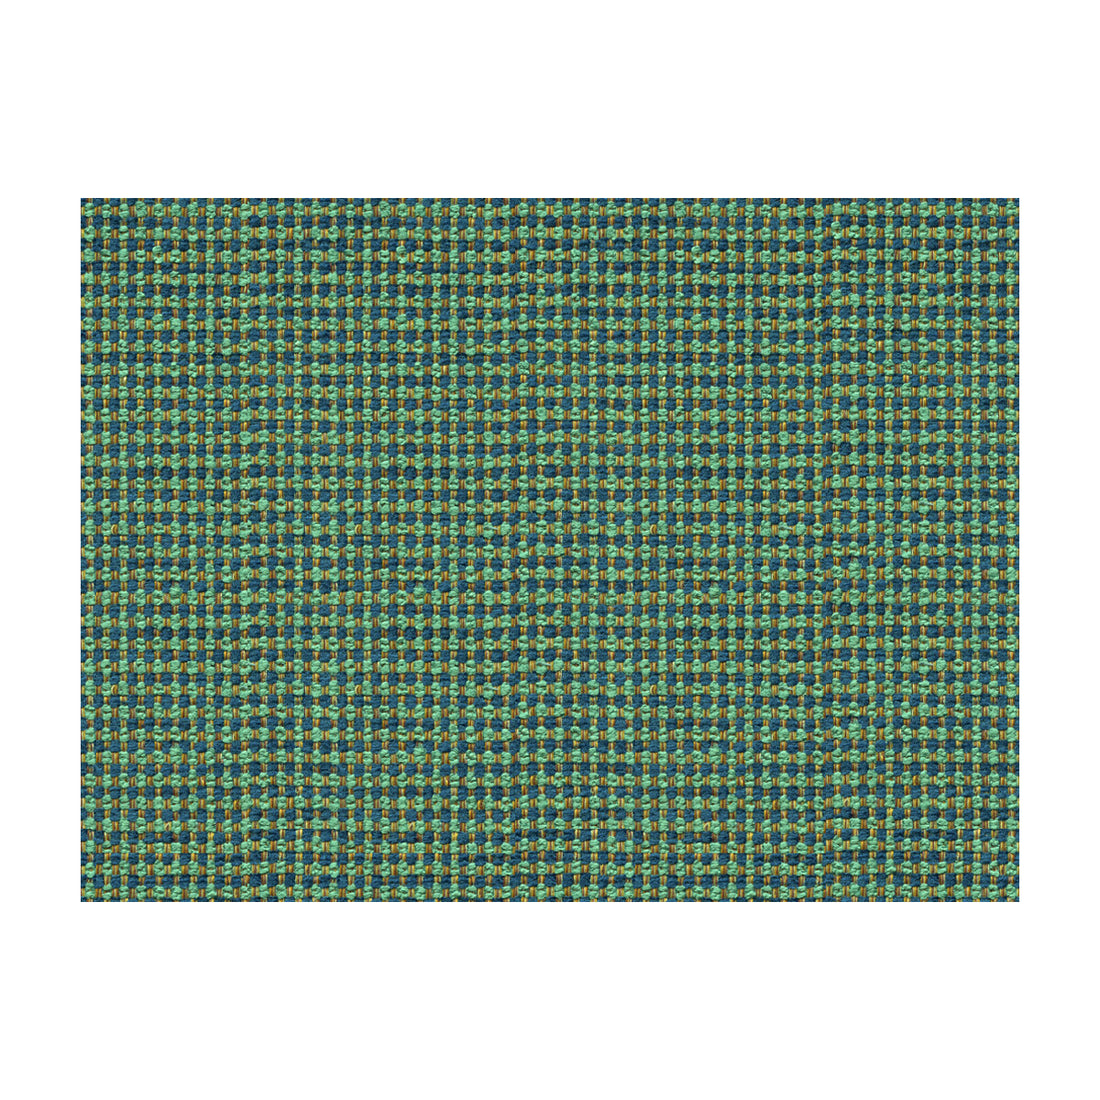 Kravet Smart fabric in 28767-513 color - pattern 28767.513.0 - by Kravet Smart in the Gis collection